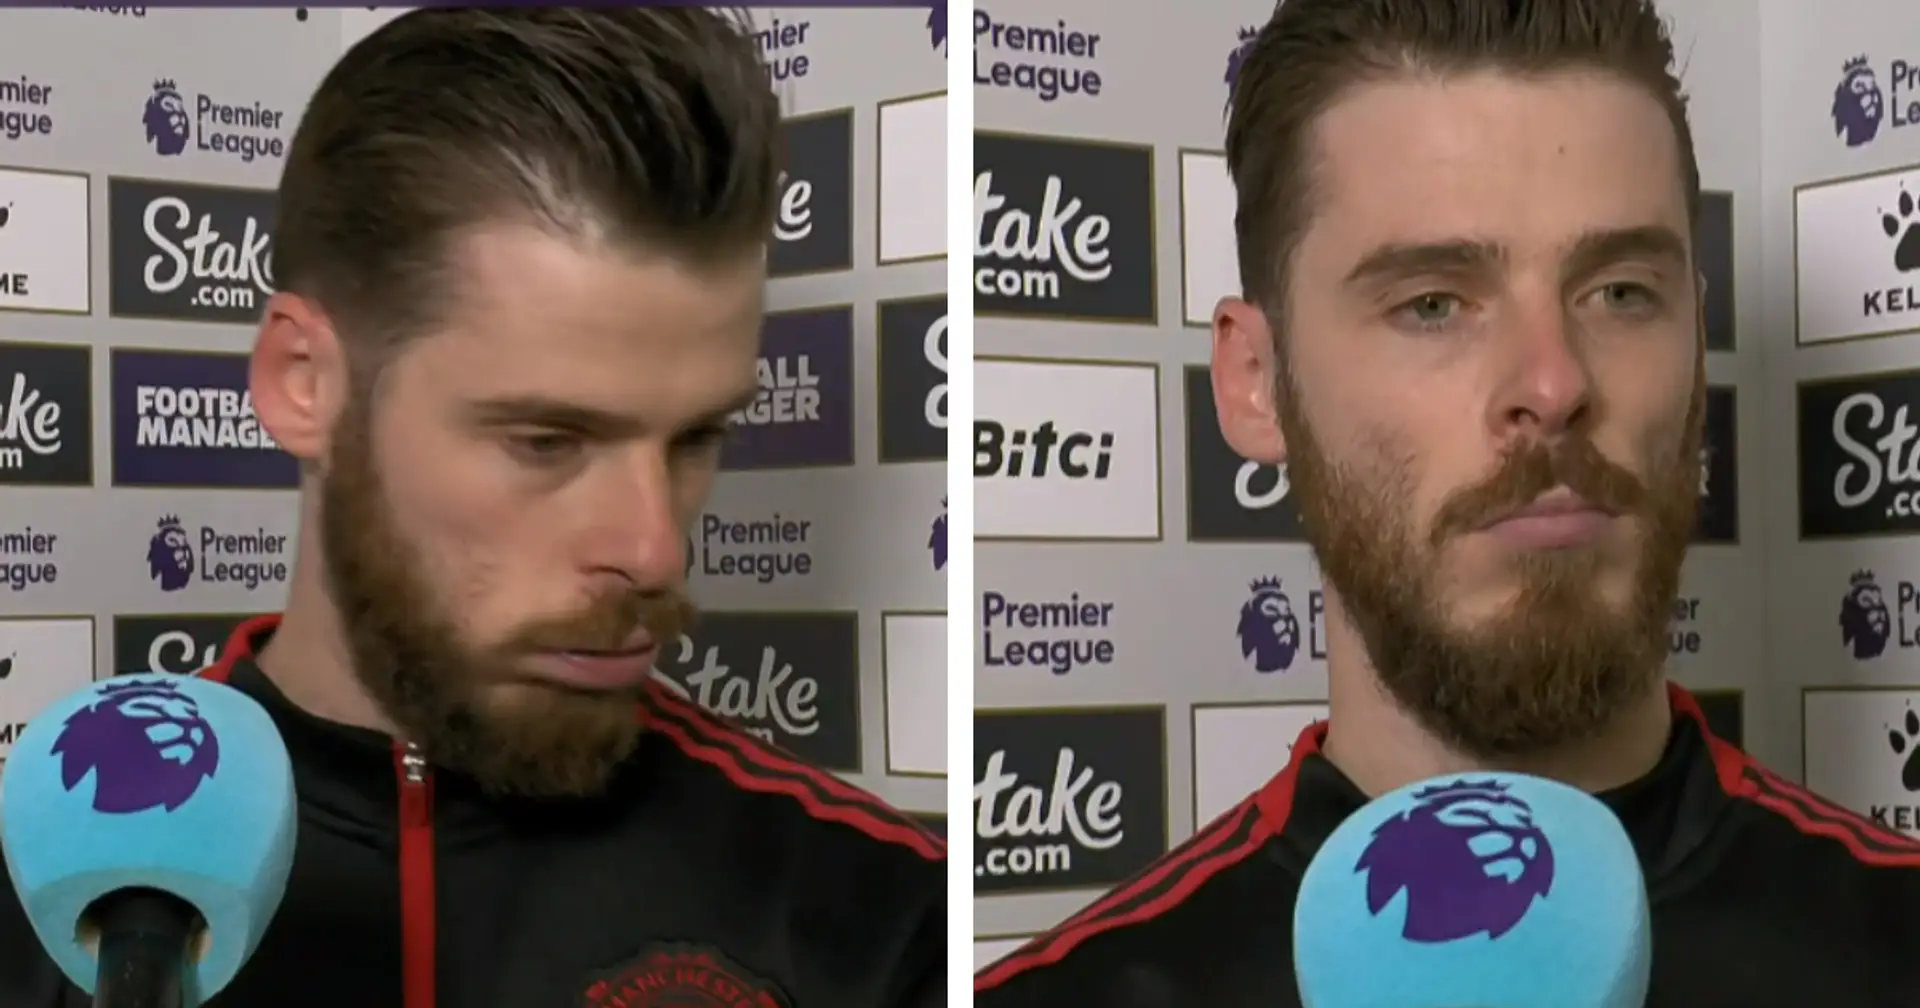 De Gea: 'We are paid to play for Man United and must do better than that'